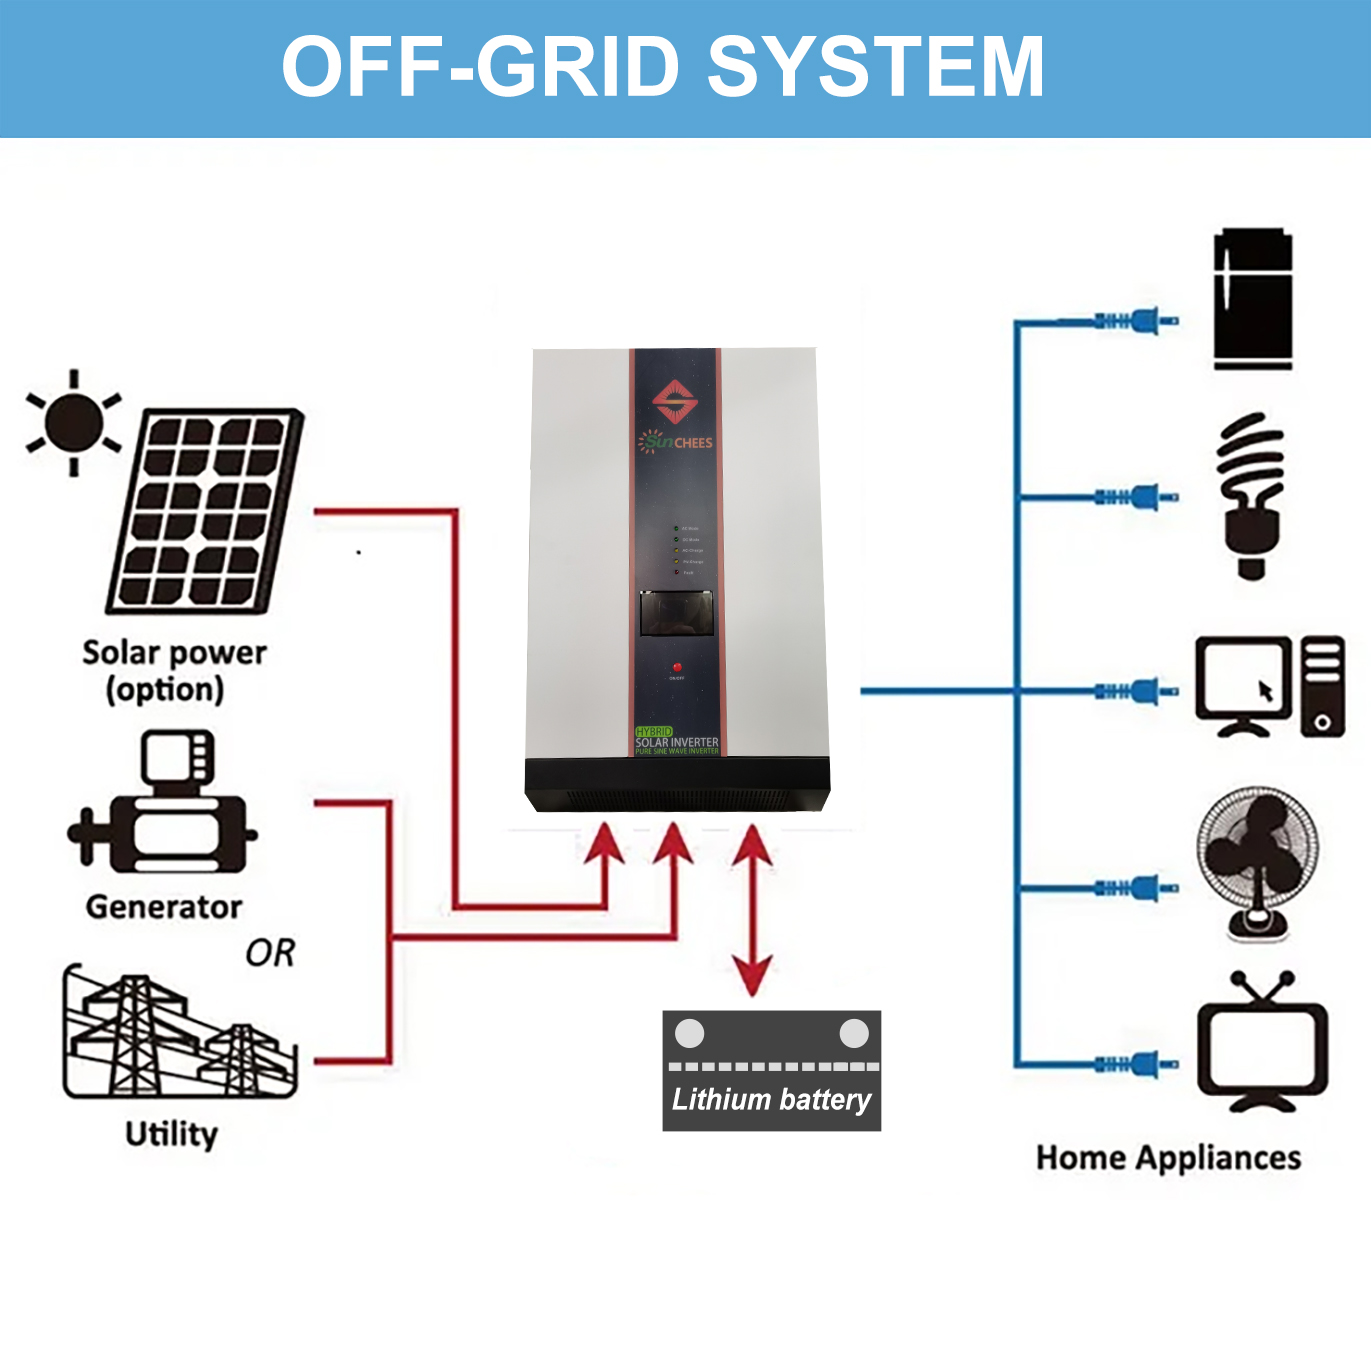 6kw off grid Photovoltaic System Solar Kit